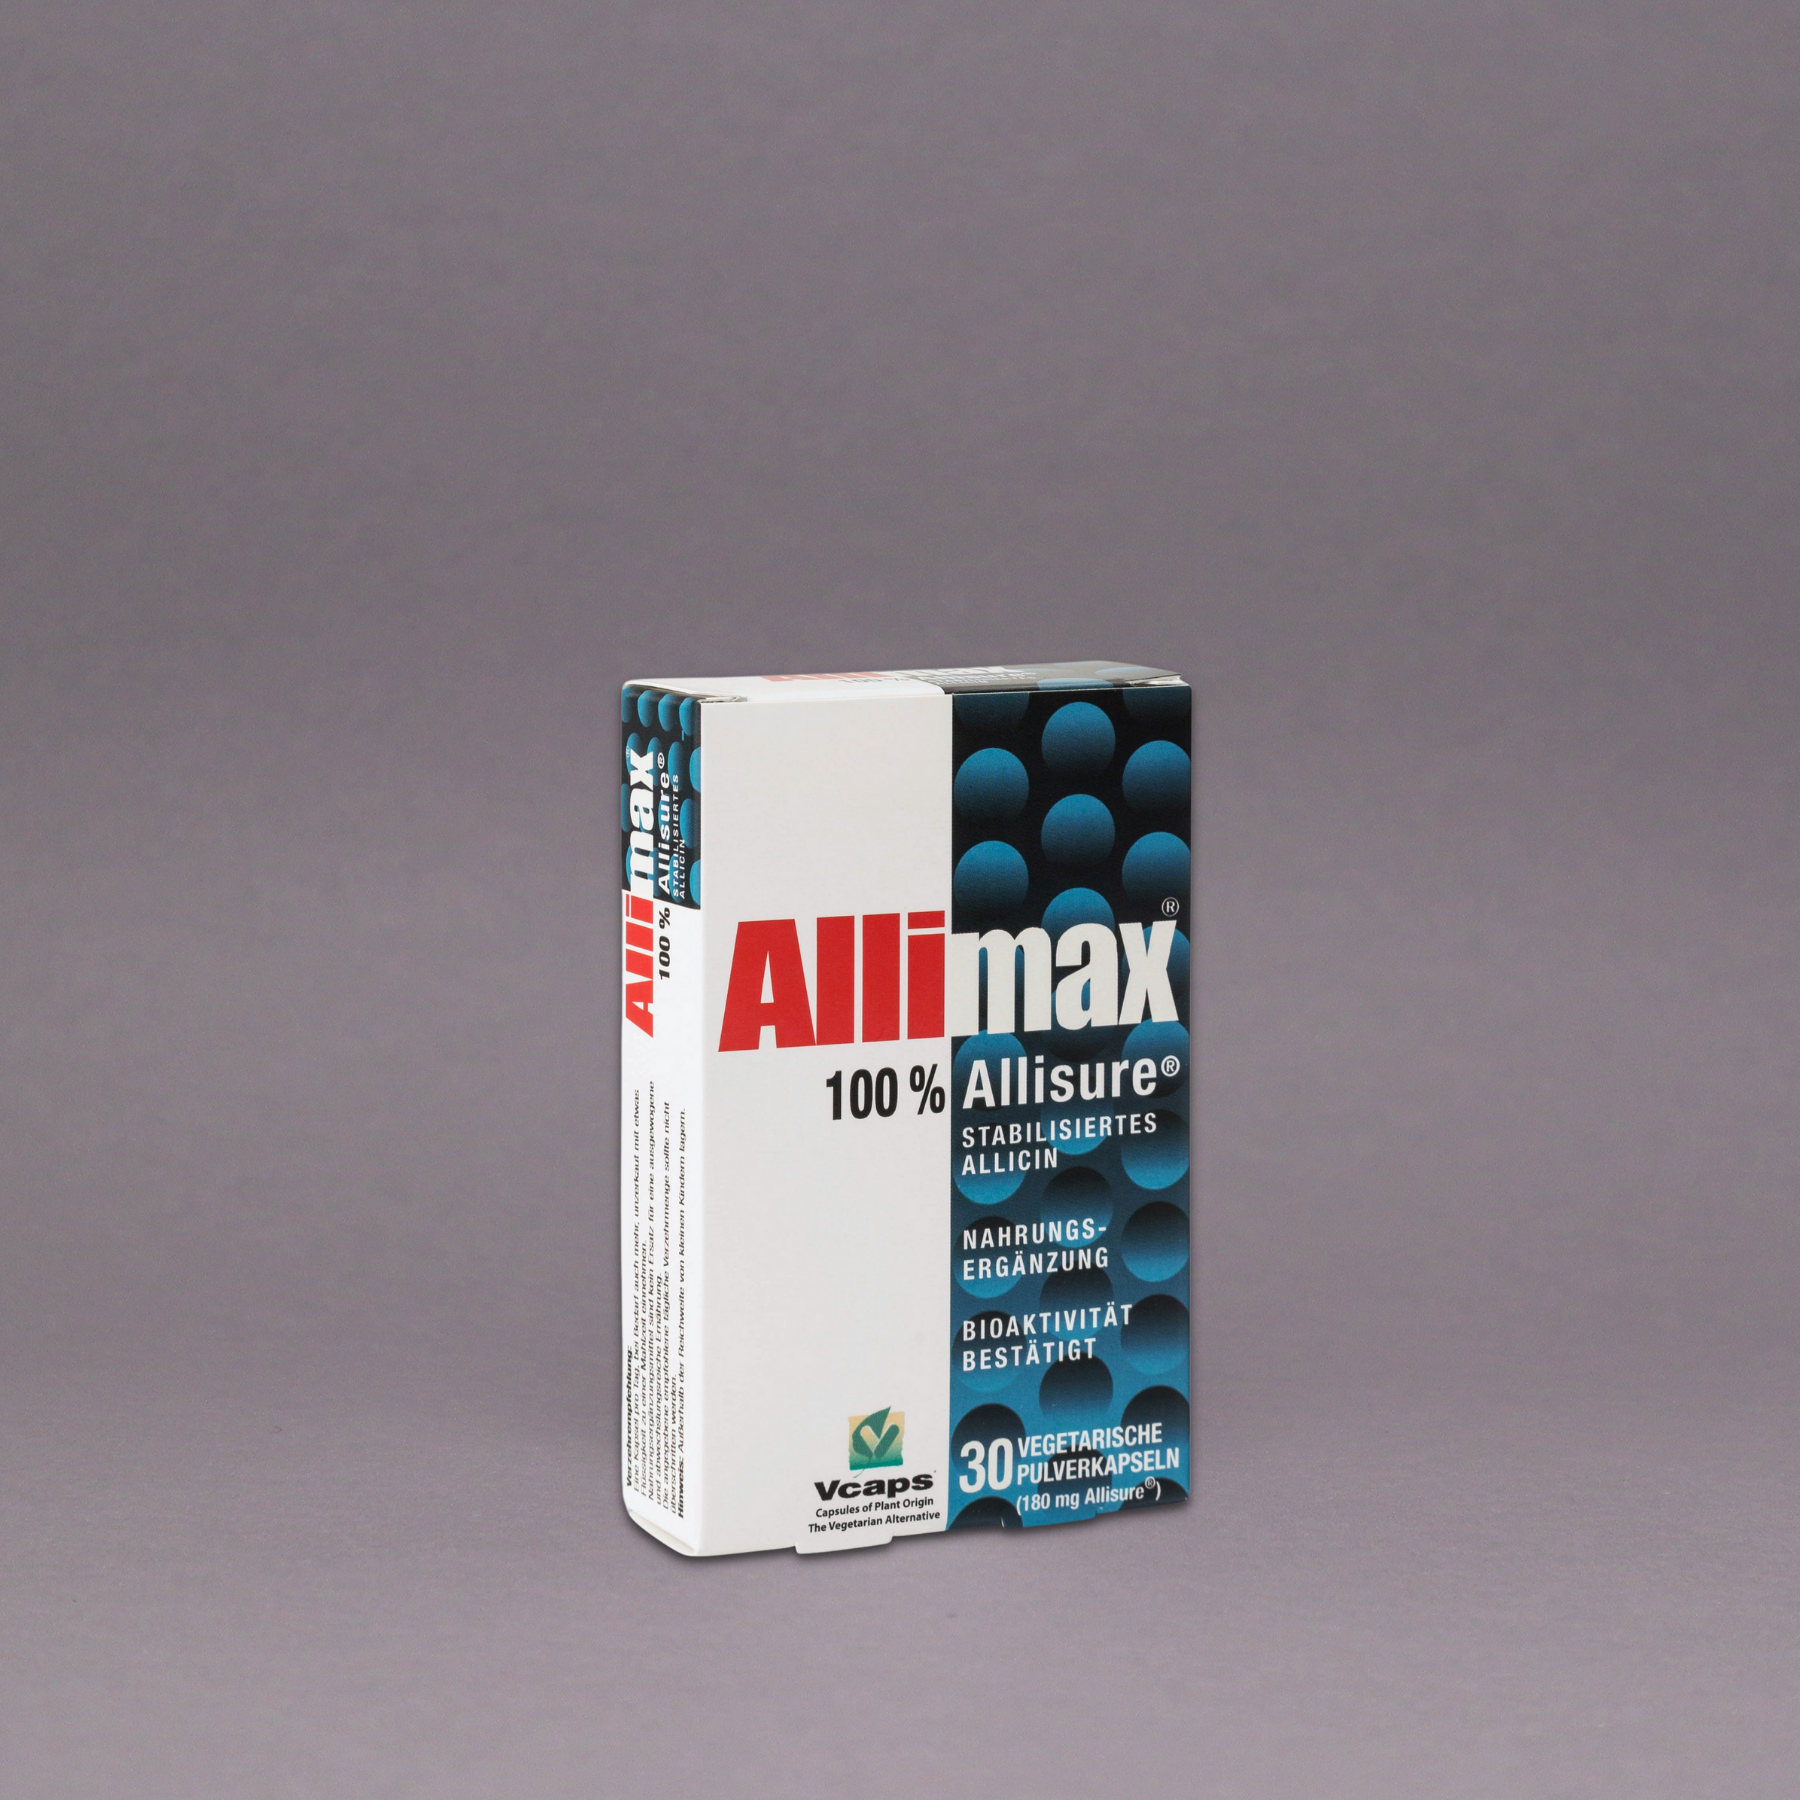 Allimax garlic extract, 30 capsules